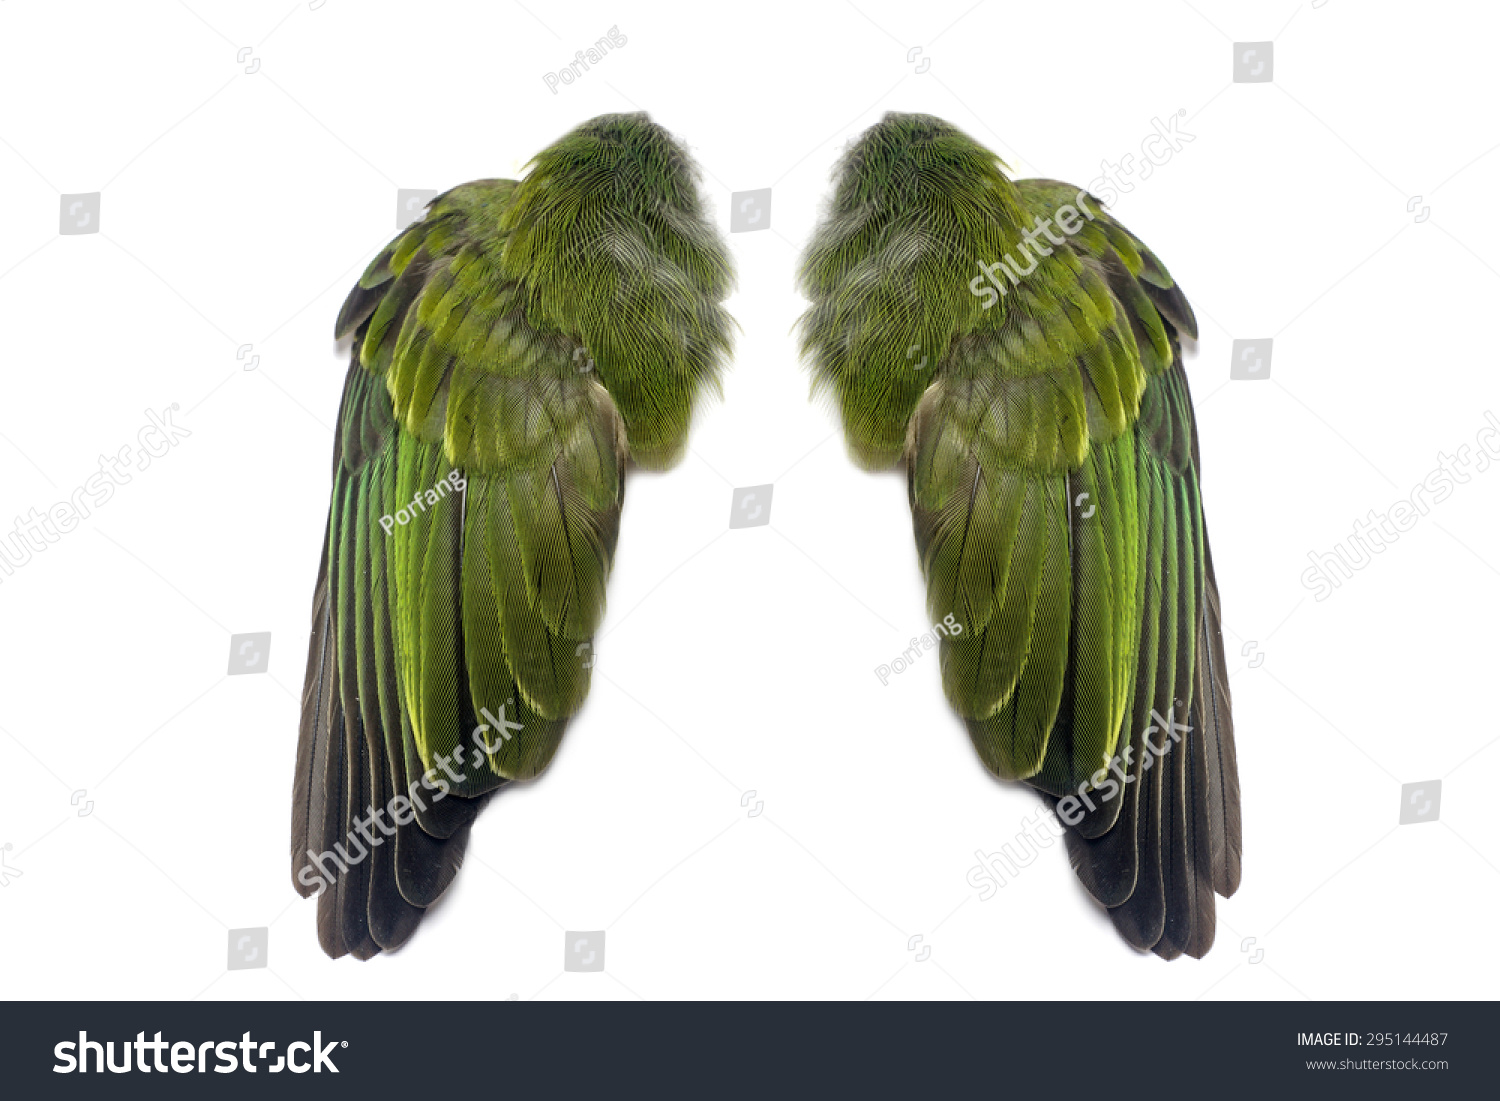 Green Pair Folded Bird Wings Isolated Stock Photo Edit Now 295144487,Grilled Pears With Honey